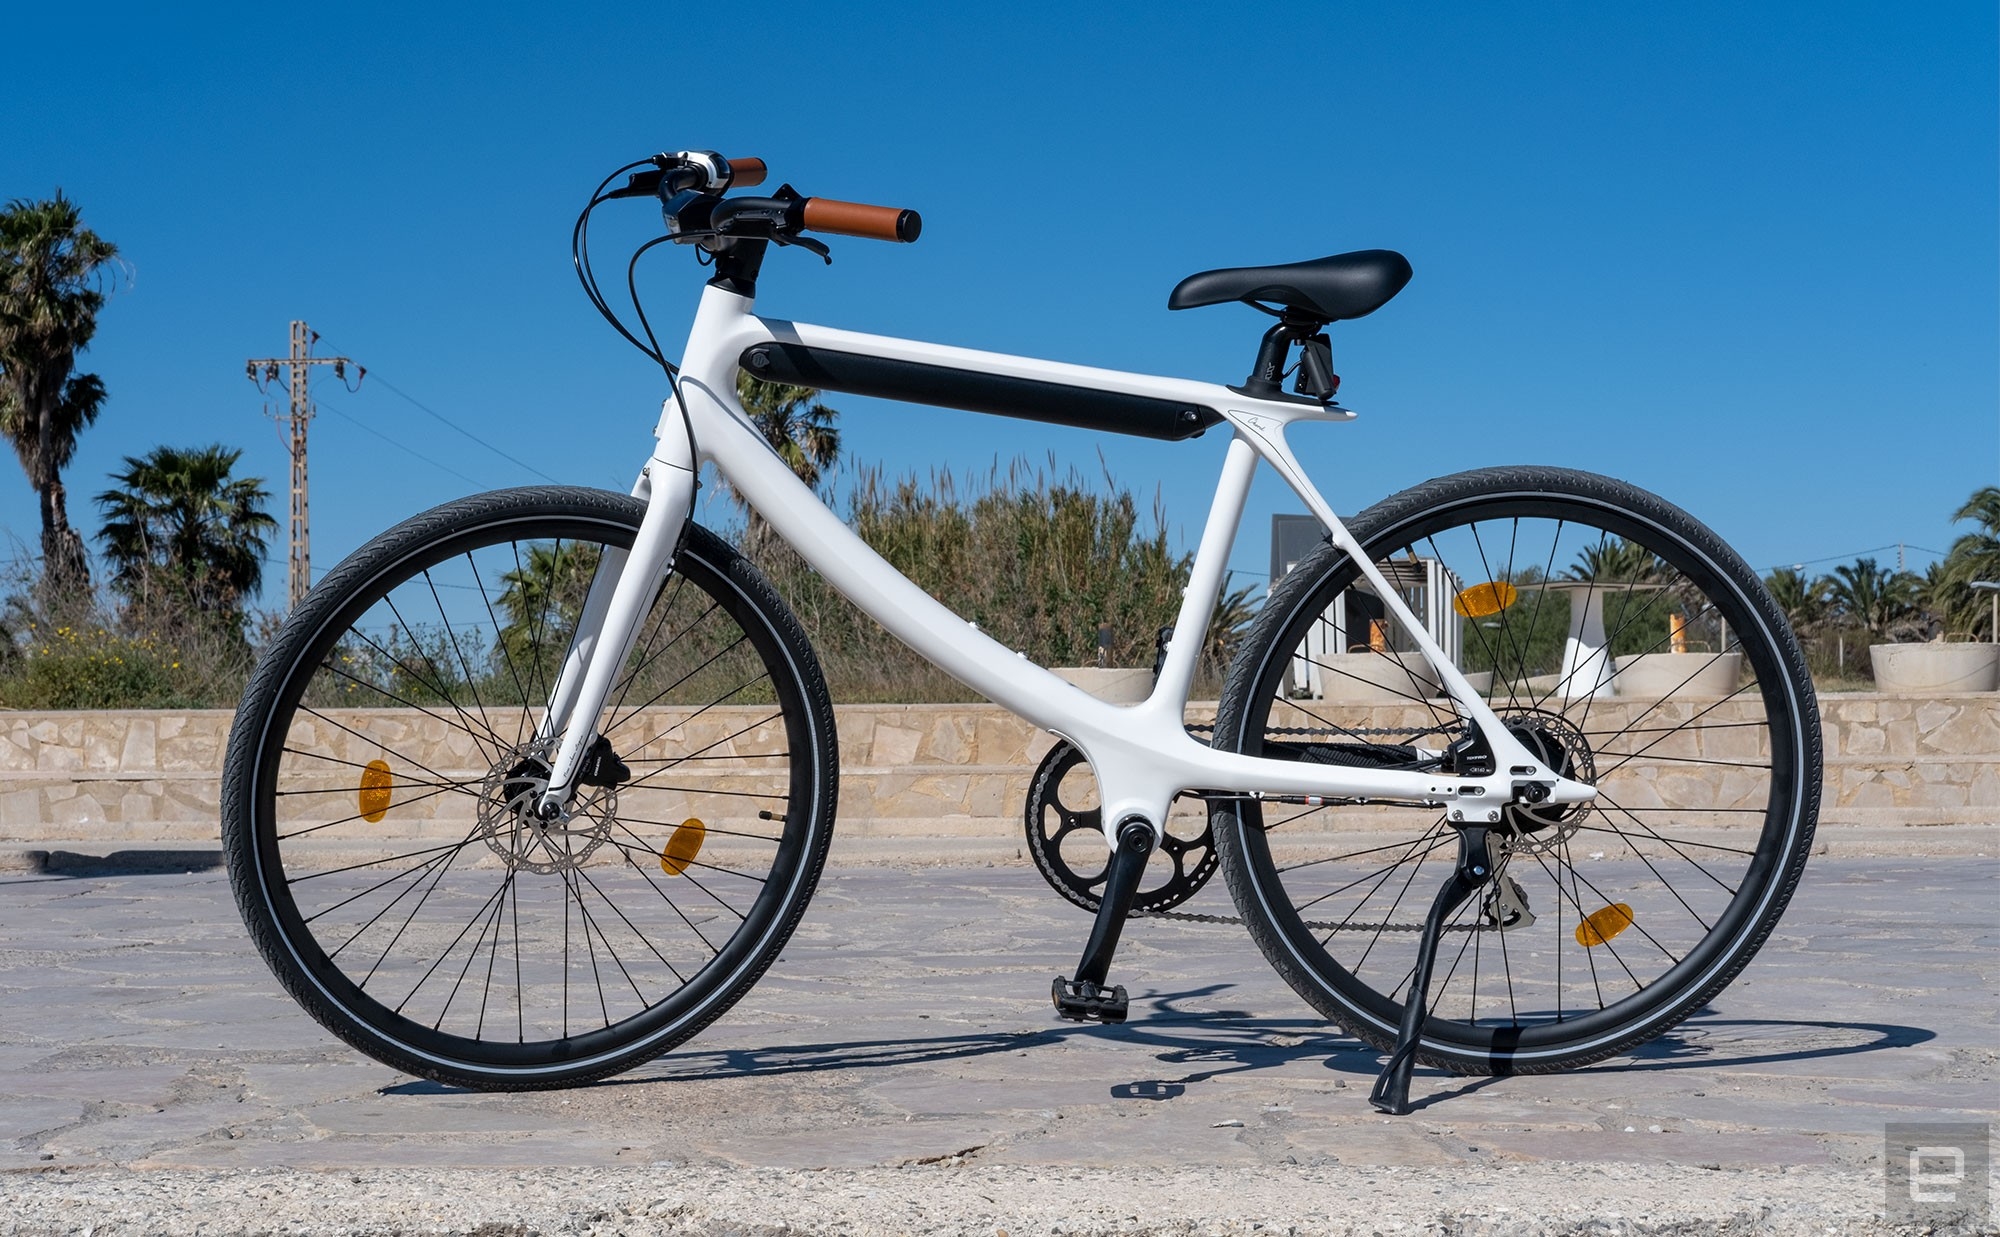 Urtopia's Chord e-bike is a little overkill for a city ride and that's okay | DeviceDaily.com